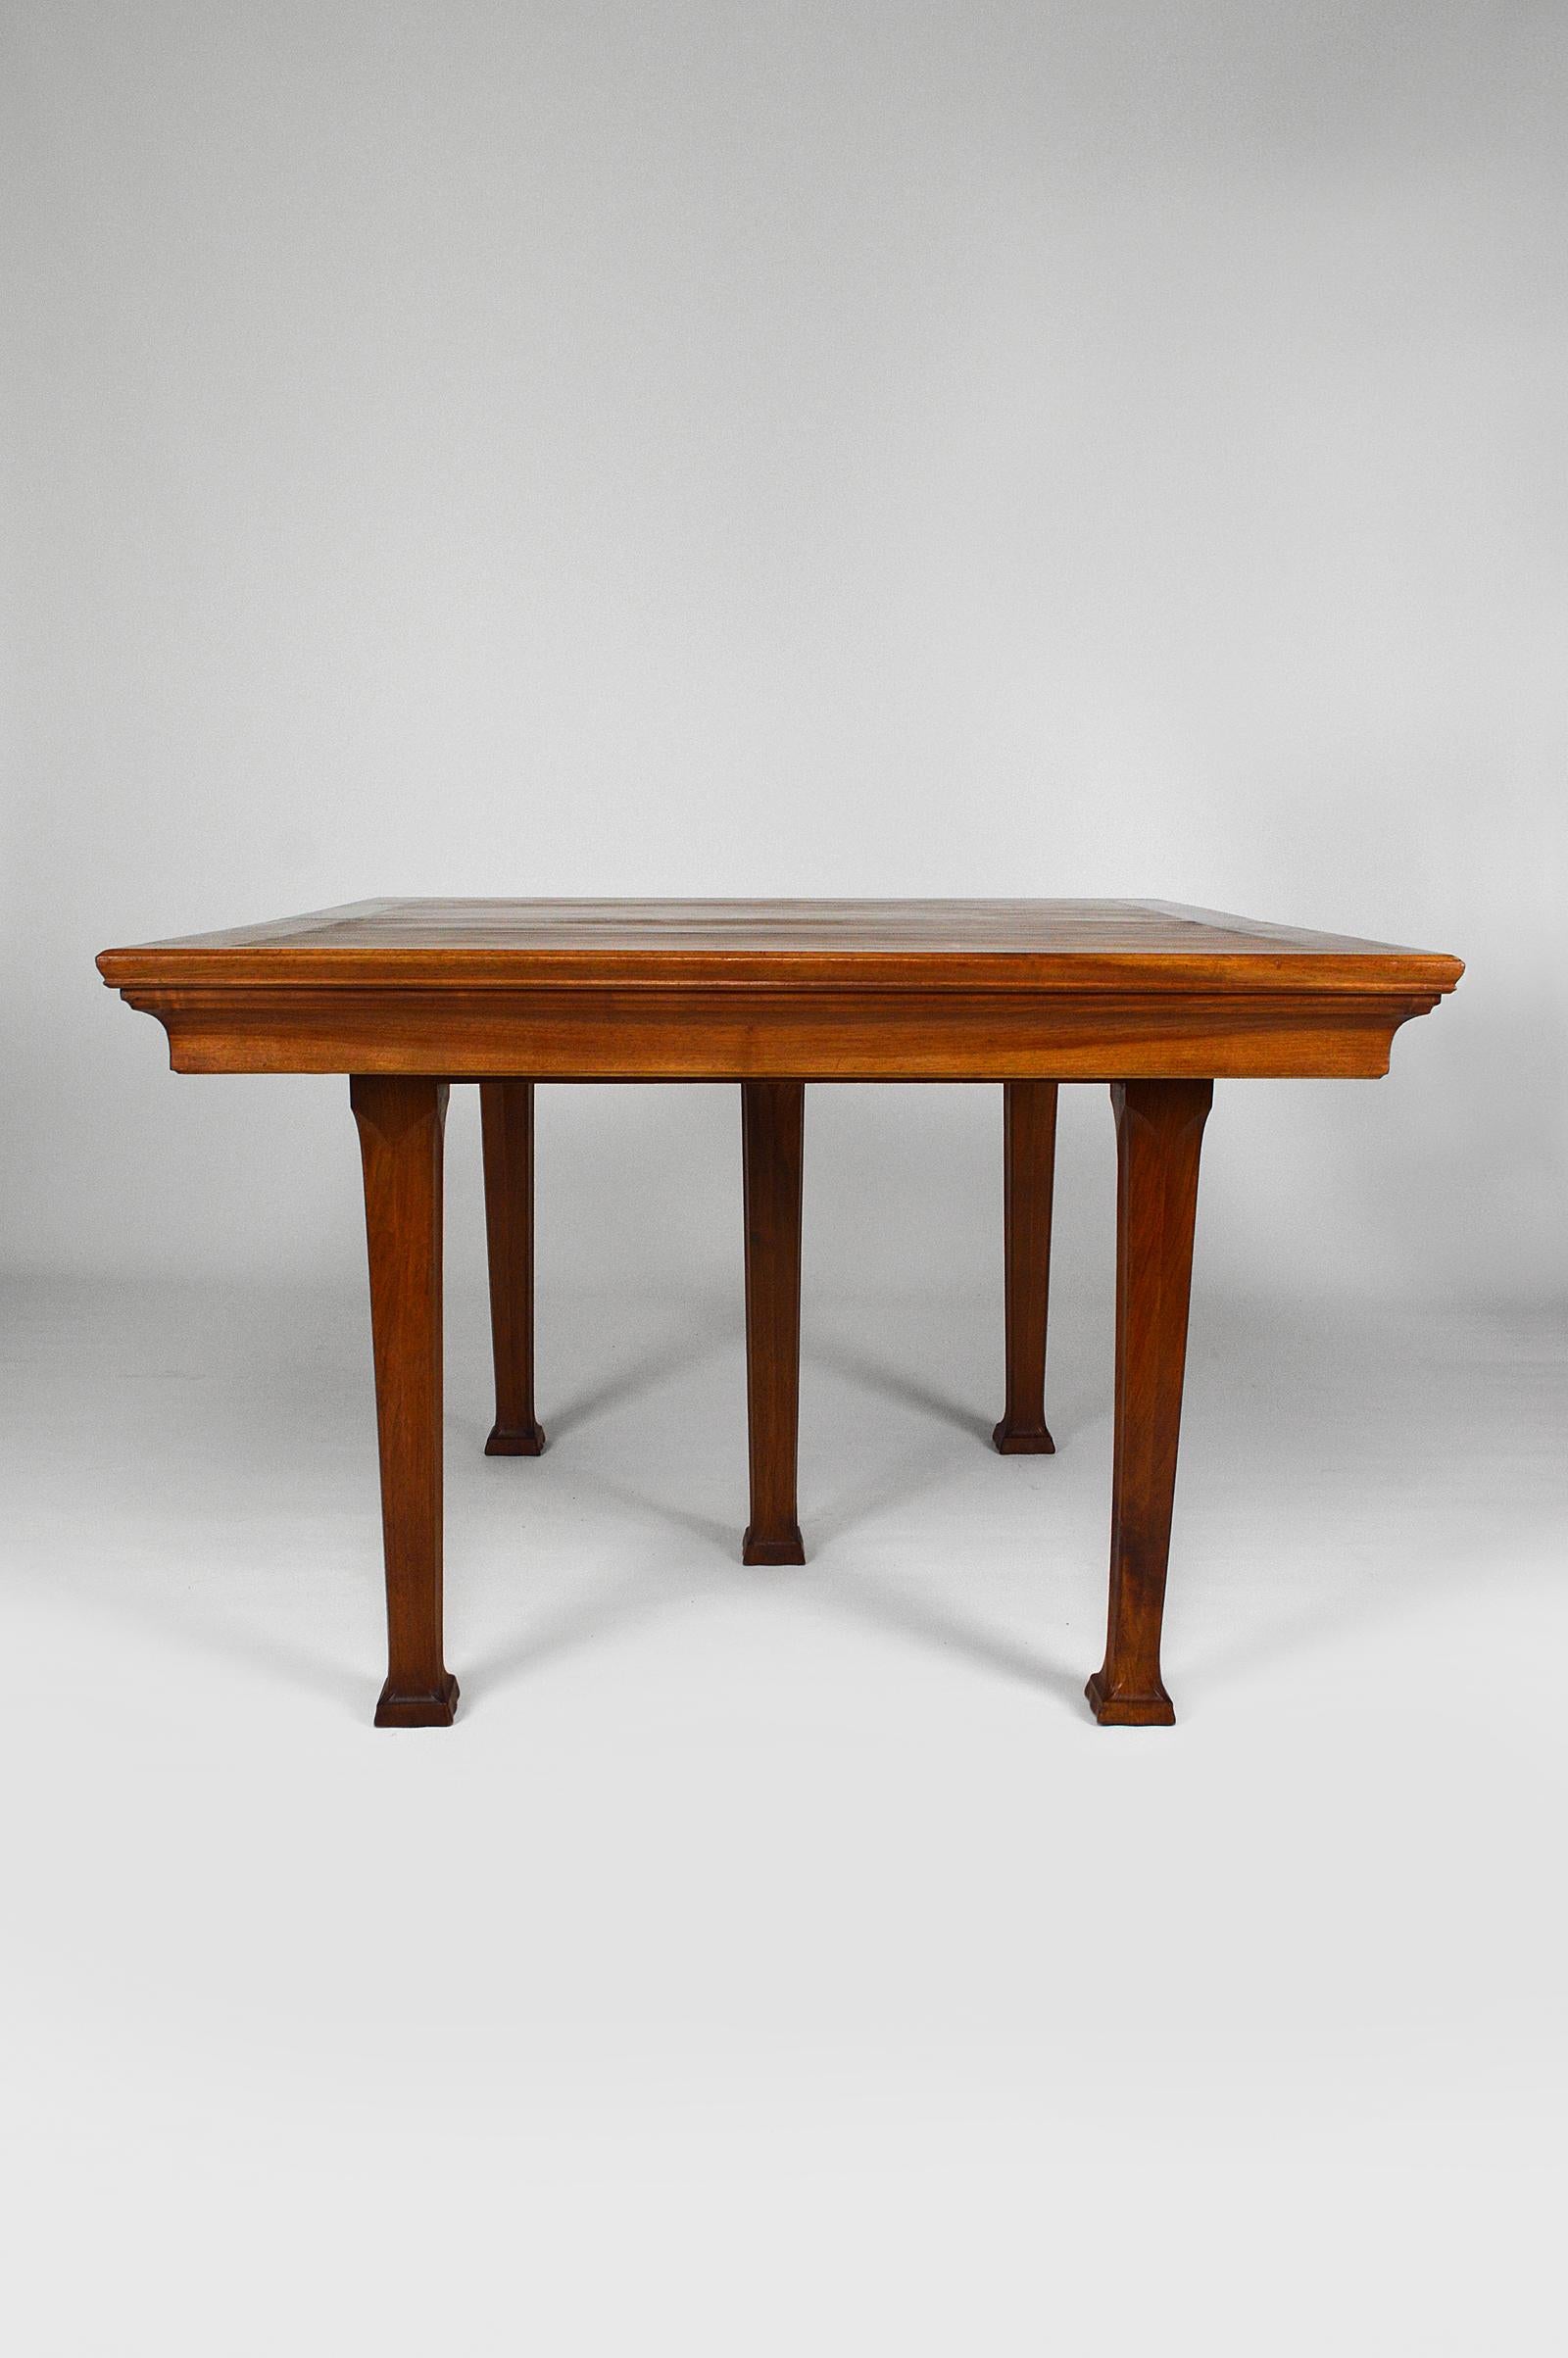 French Art Nouveau Carved Walnut Dining Table, circa 1905, Attributed to Georges Nowak For Sale